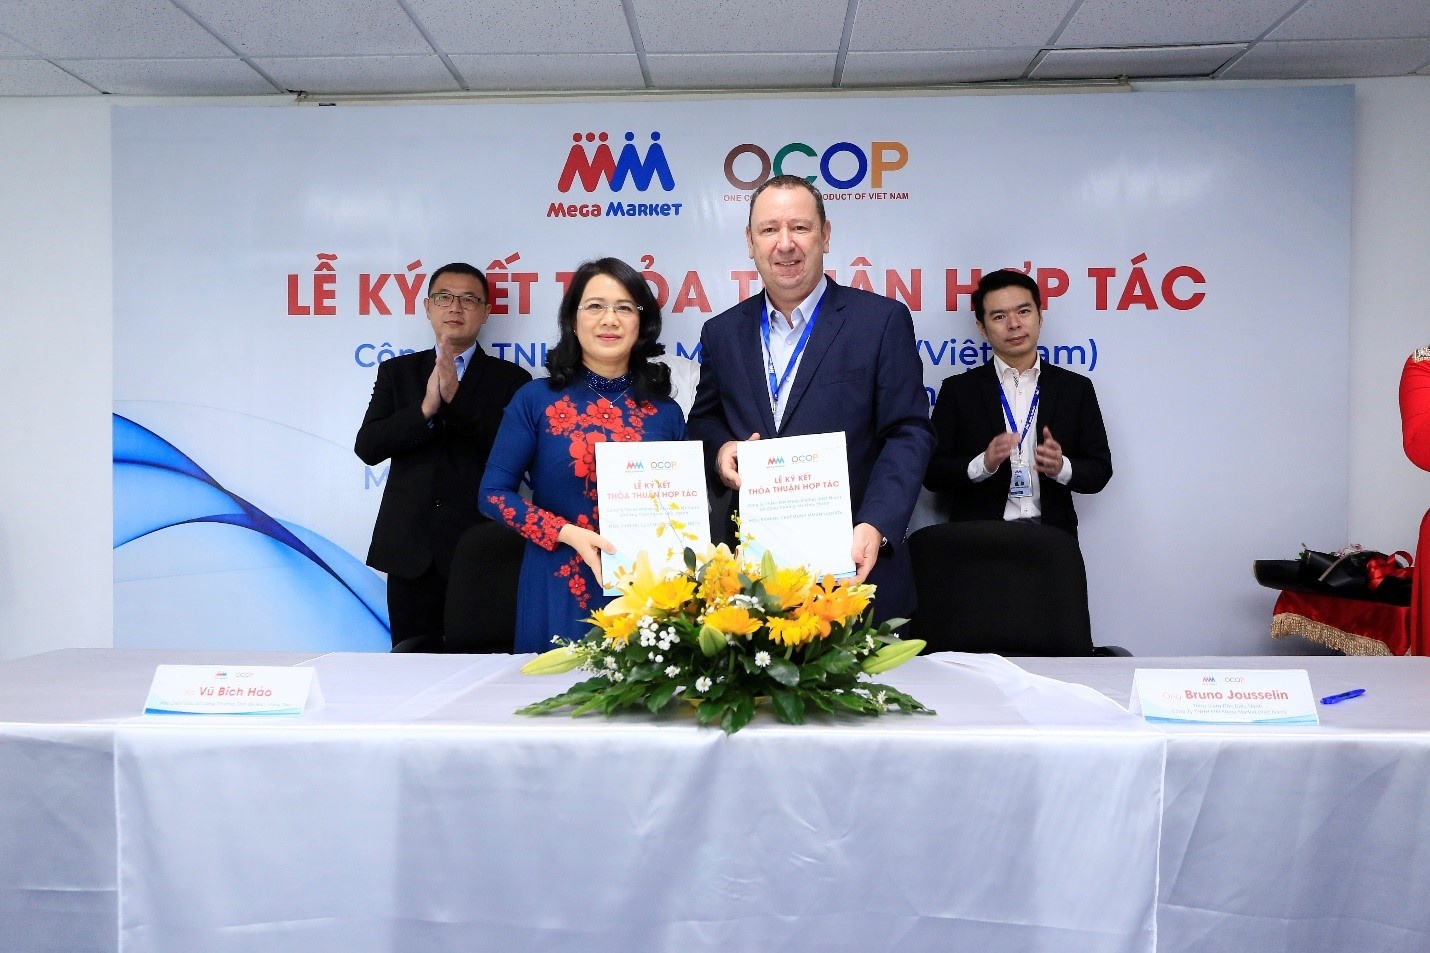 MM Mega Market: Five years to win over Vietnamese consumers